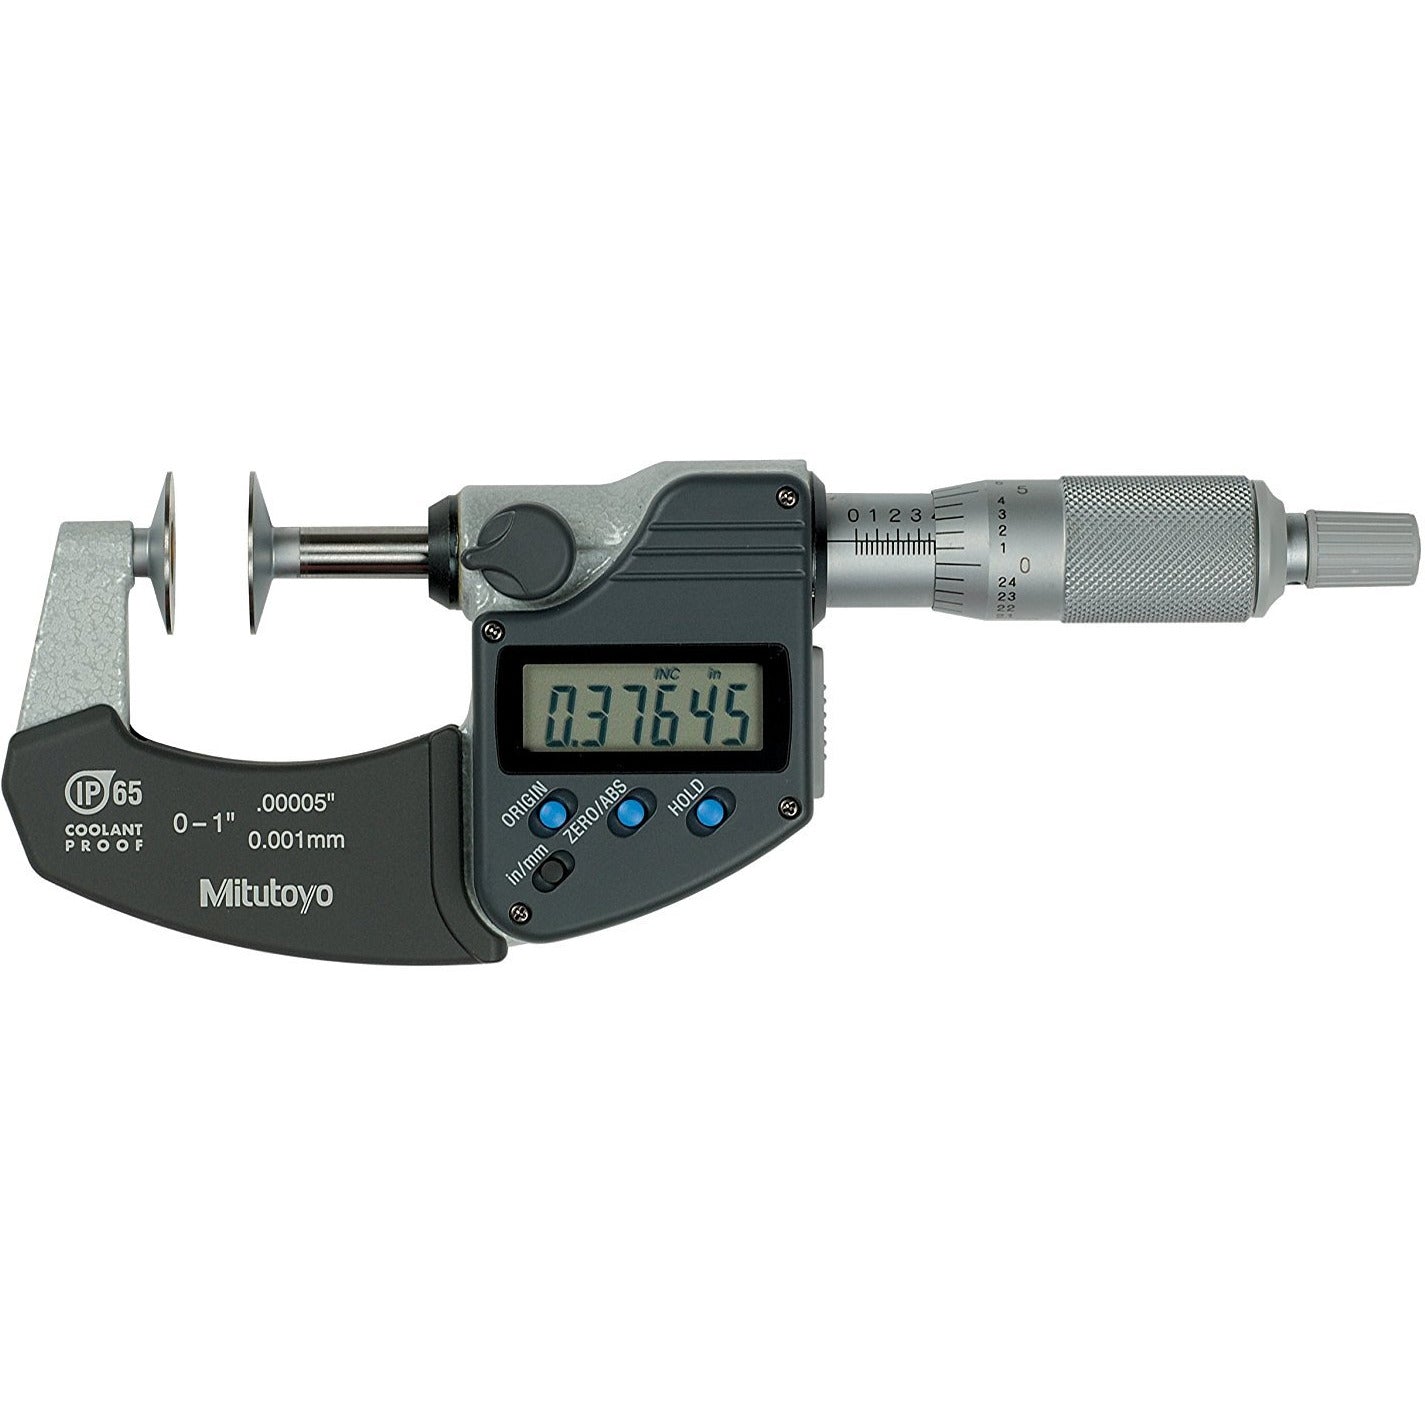 Mitutoyo Digimatic Disk Micrometer 0 - 1"/25mm x .00005"/0.001mm-Sockets & Accessories-Tool Factory